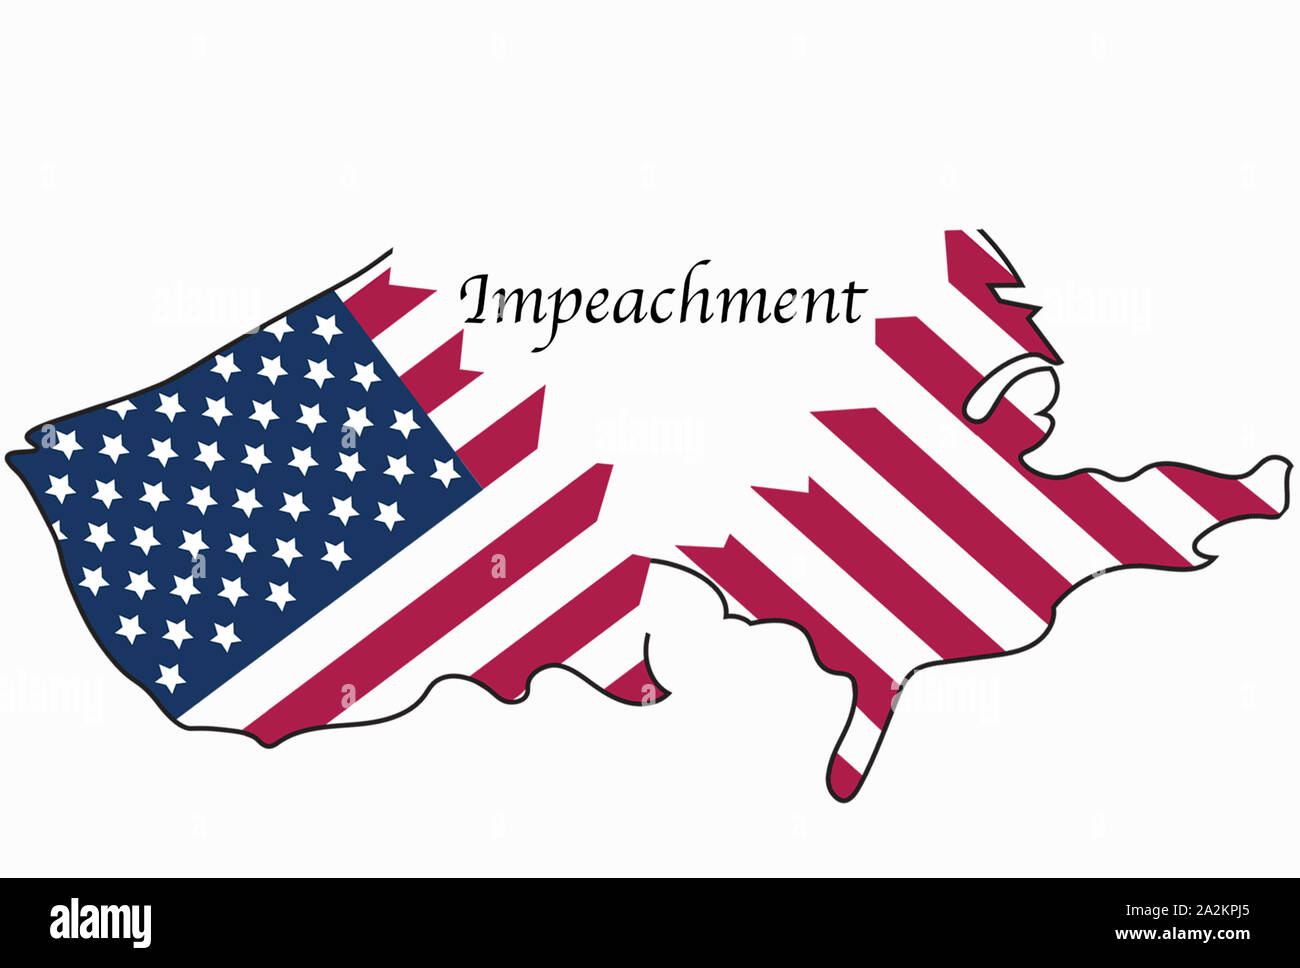 The word impeachment dividing the USA map and flag into pieces. Stock Photo